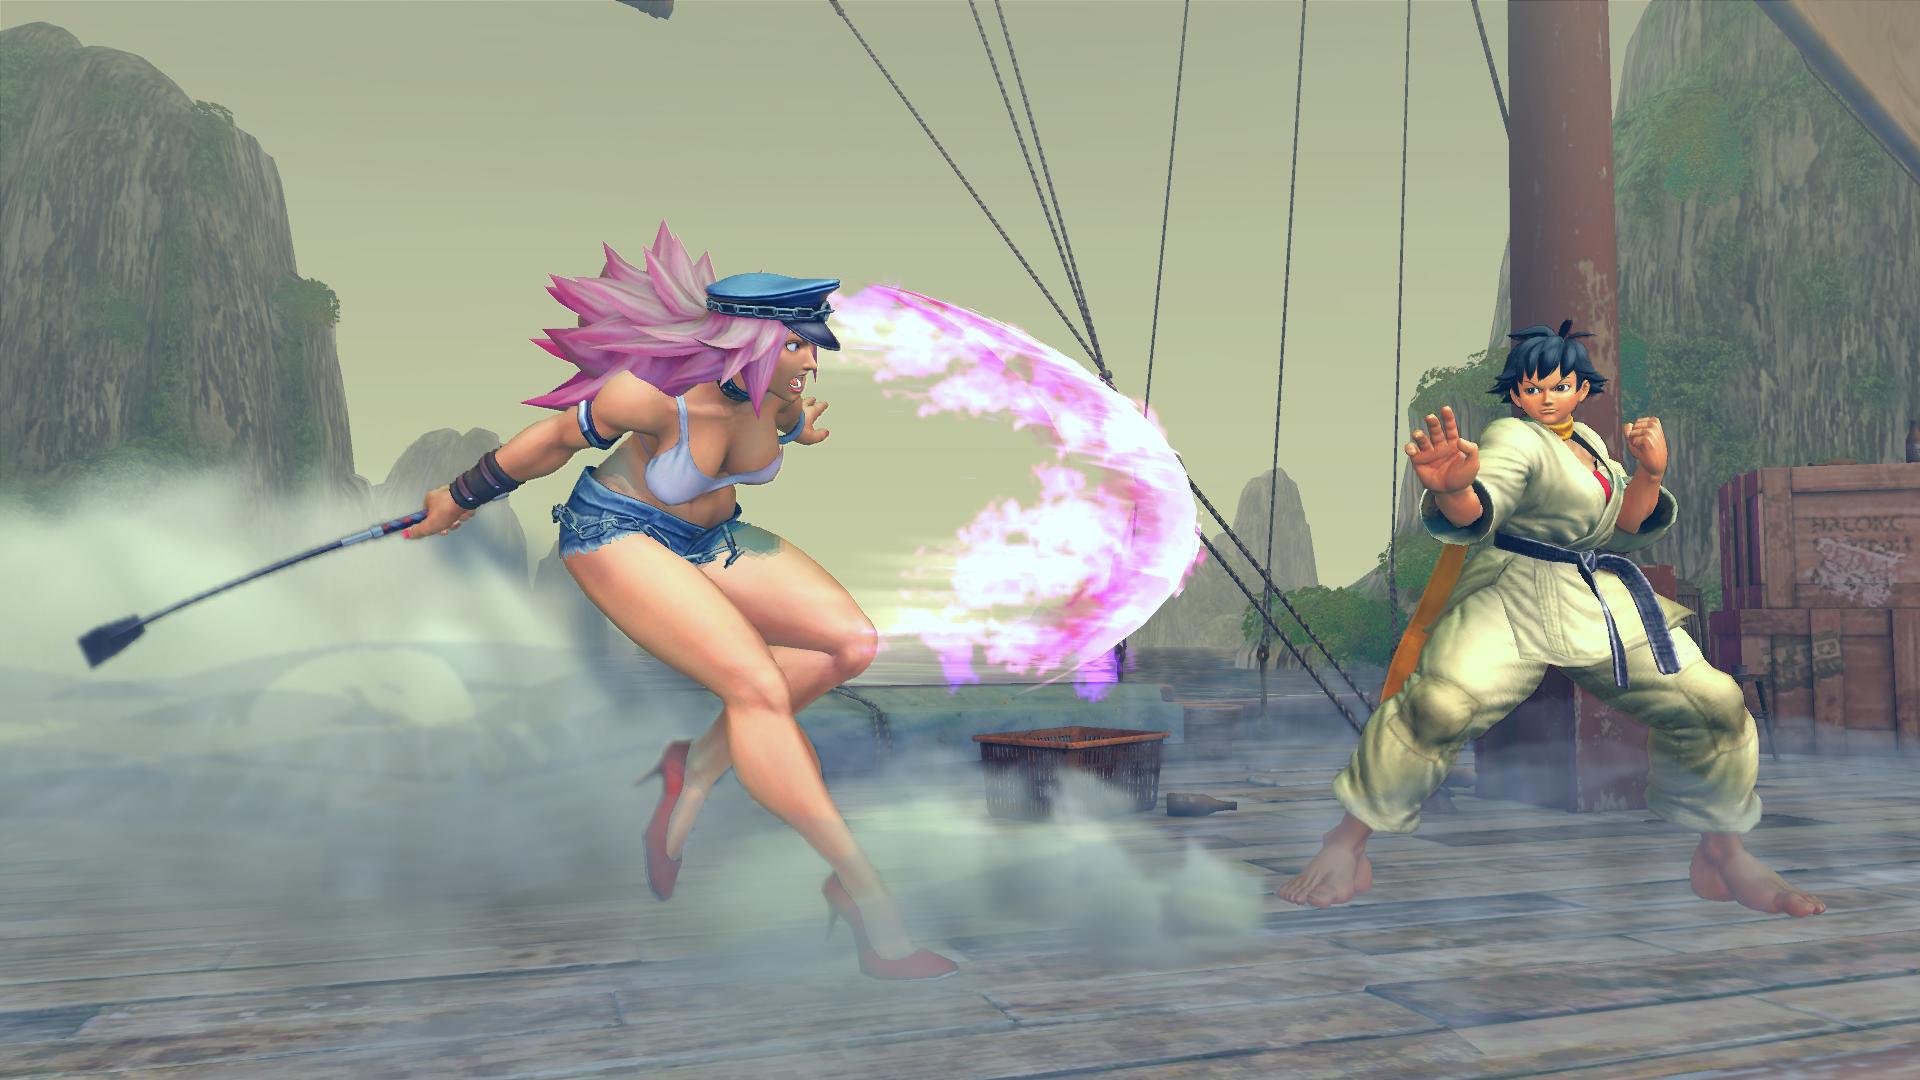 Ultra Street Fighter IV System Requirements - Can I Run It? -  PCGameBenchmark